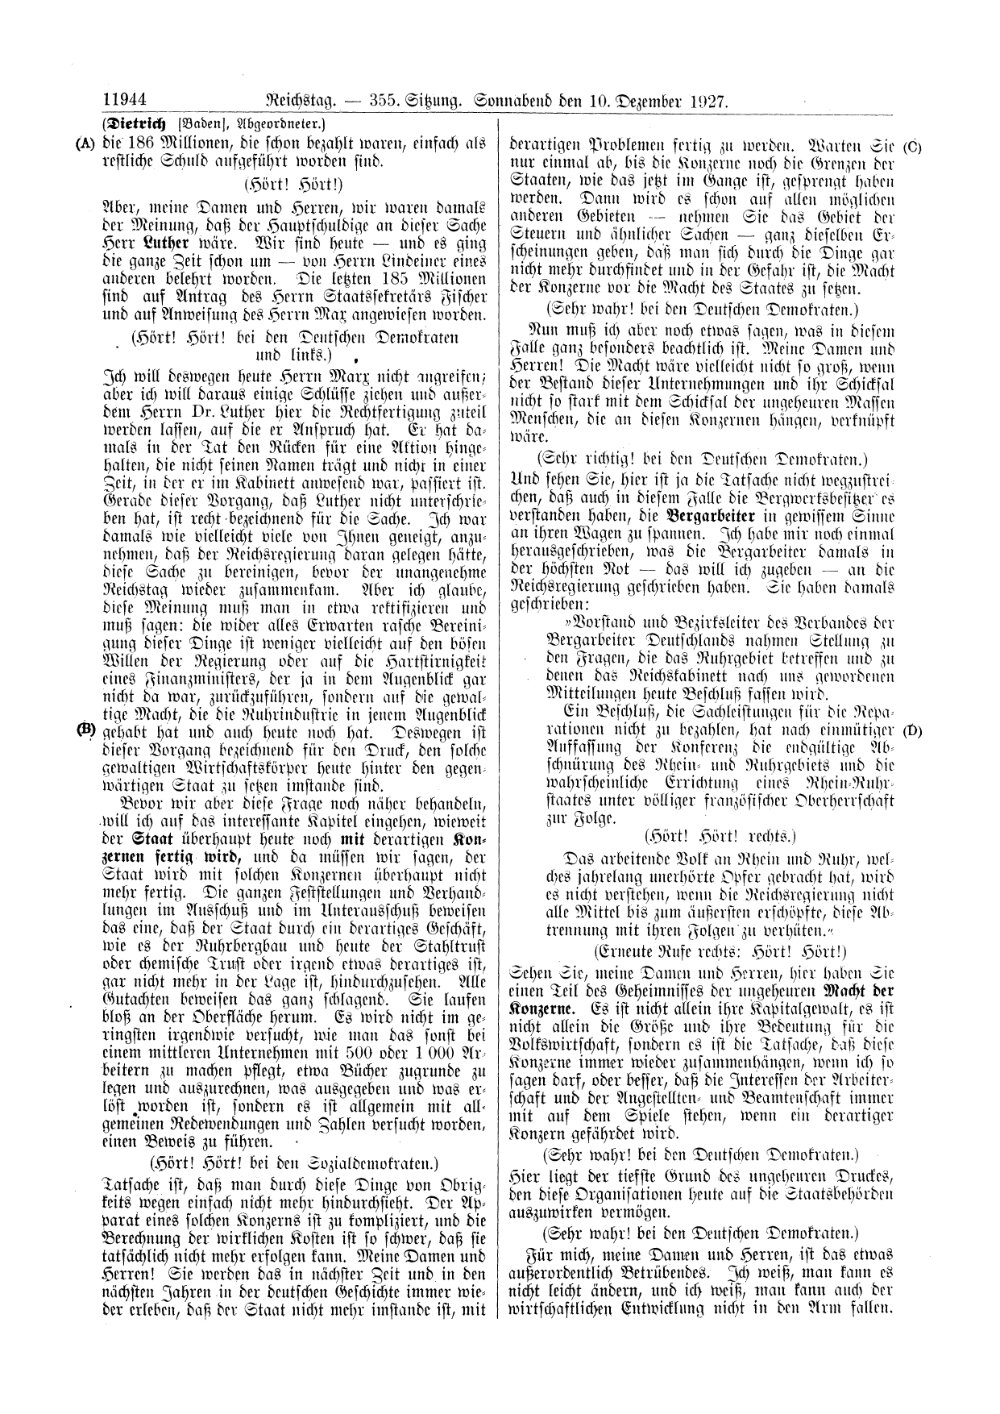 Scan of page 11944